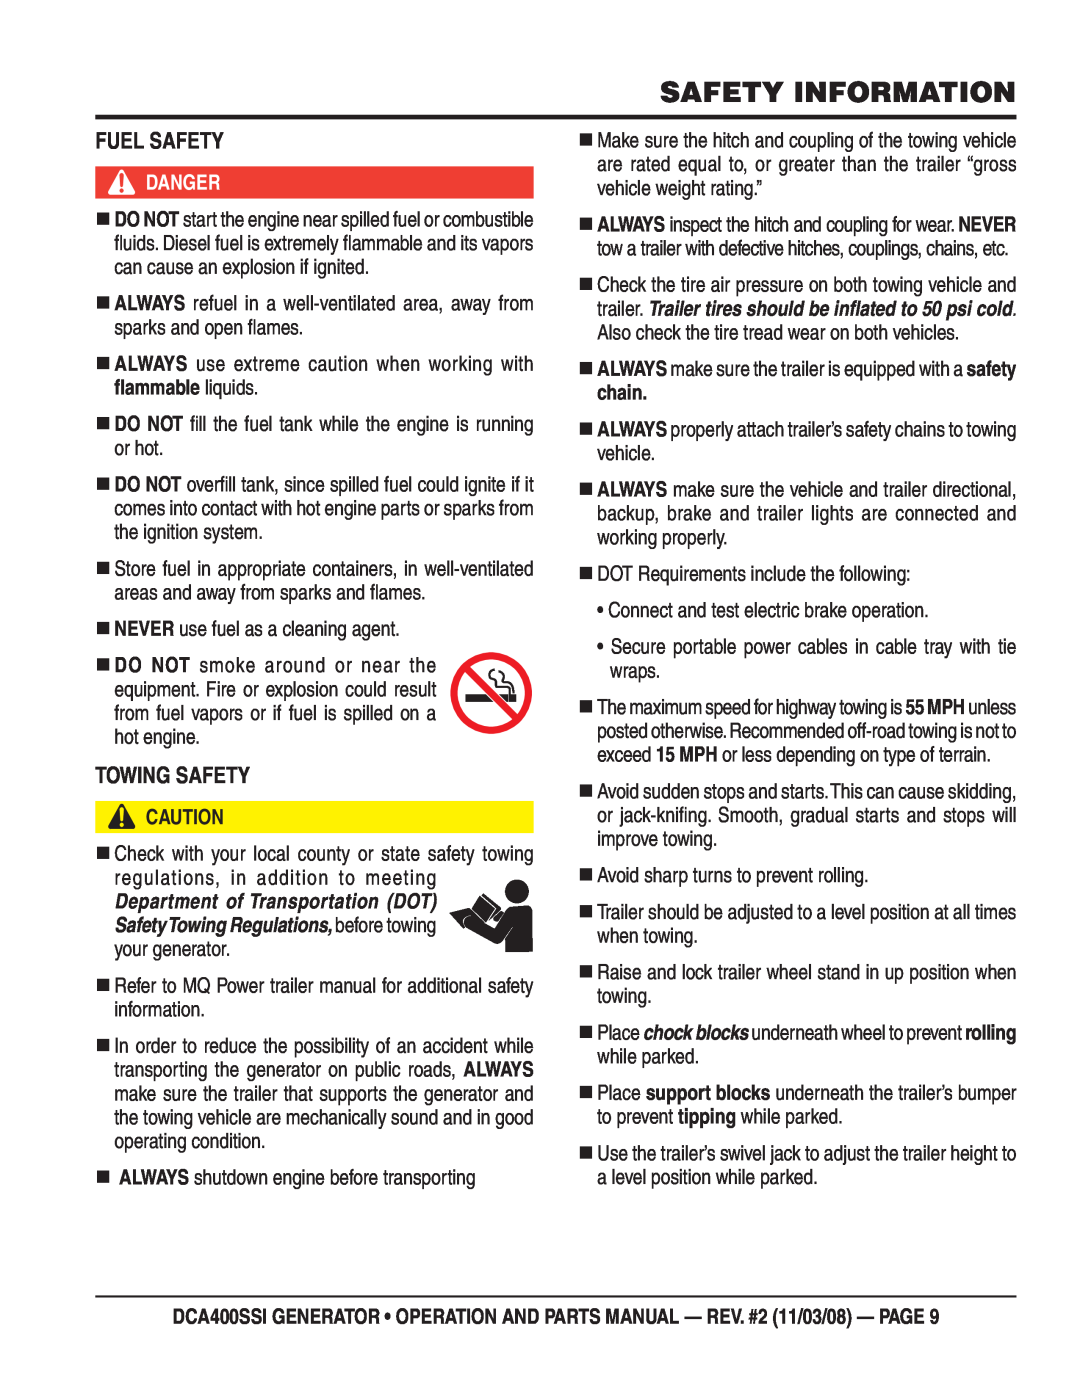 Multiquip DCA400SSI manual Fuel Safety, Towing Safety, Safety Information, Danger 